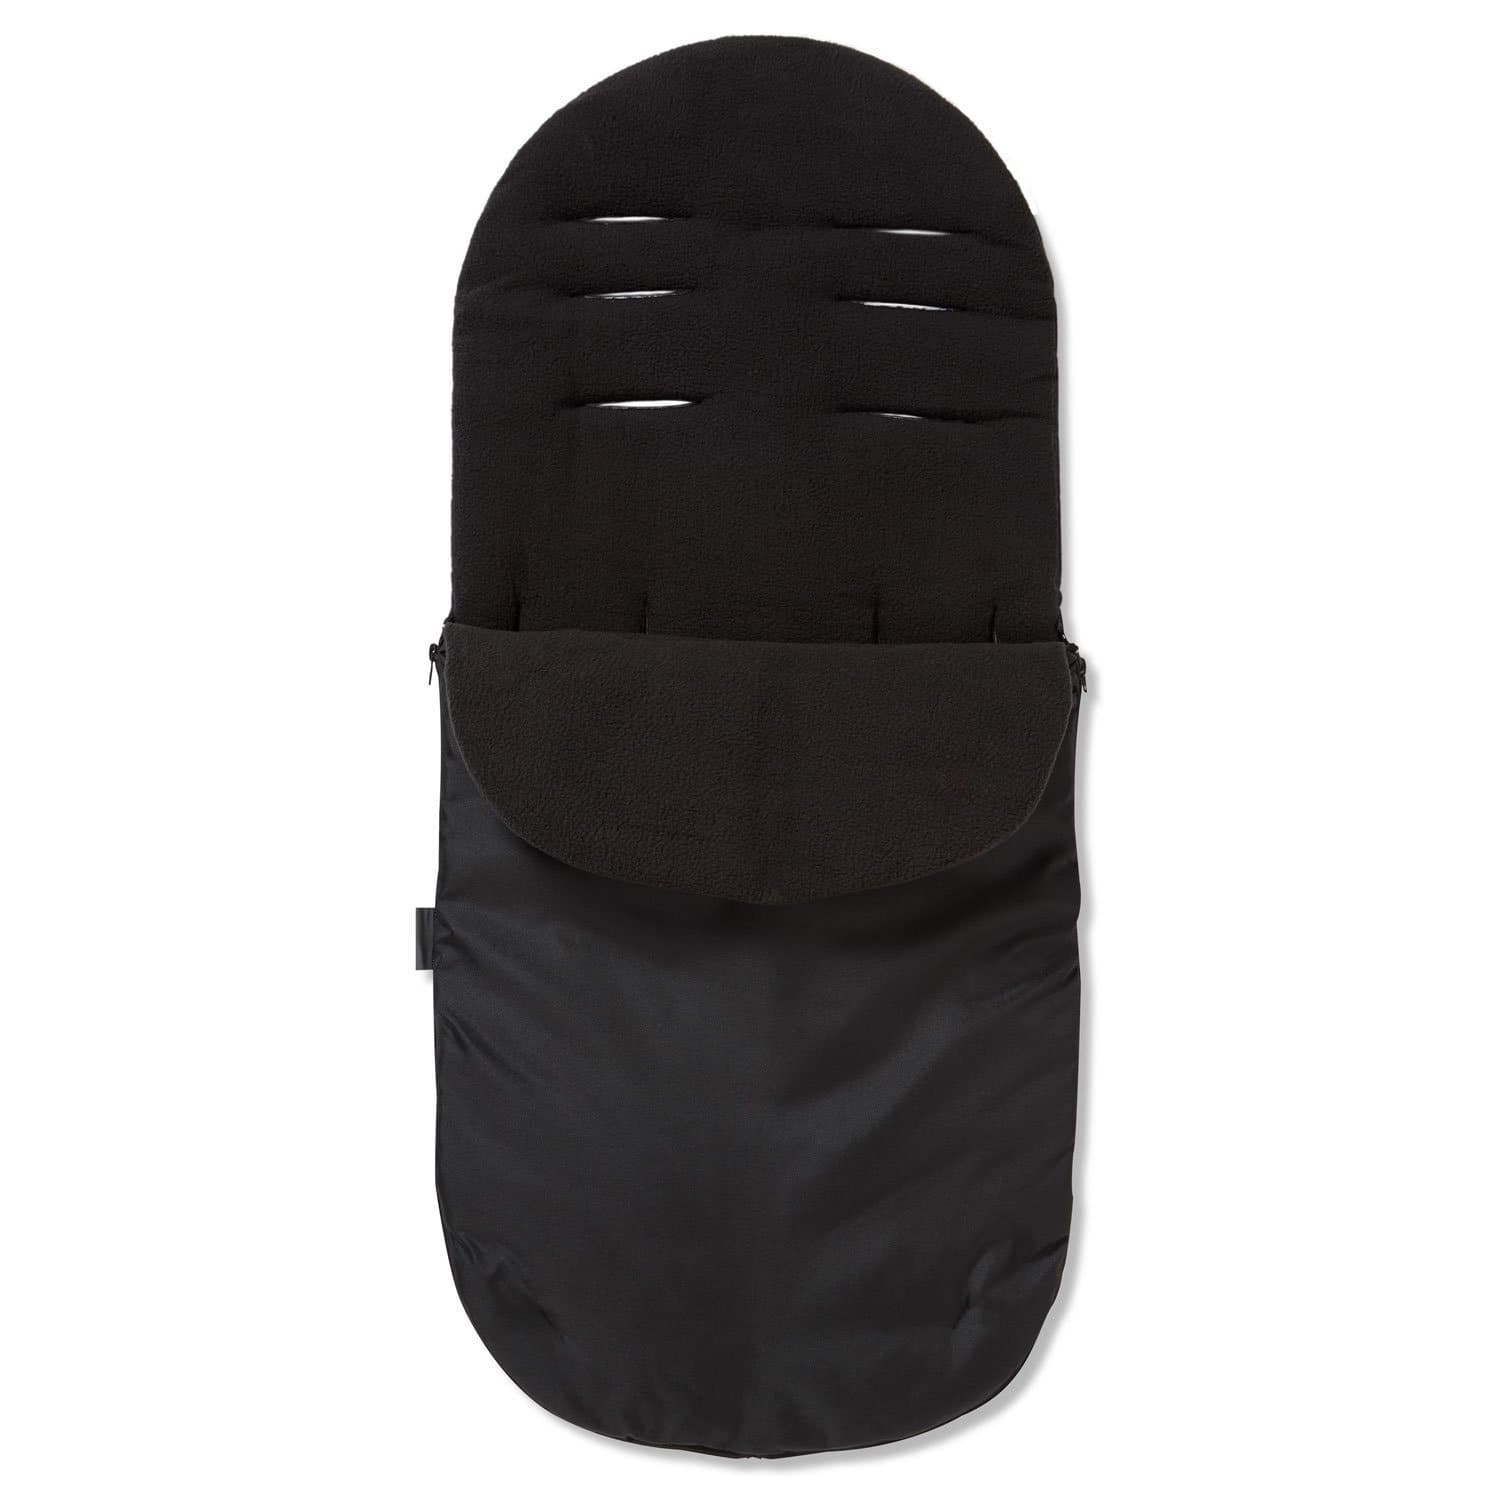 Footmuff / Cosy Toes Compatible with Bebecar - Black / Fits All Models | For Your Little One